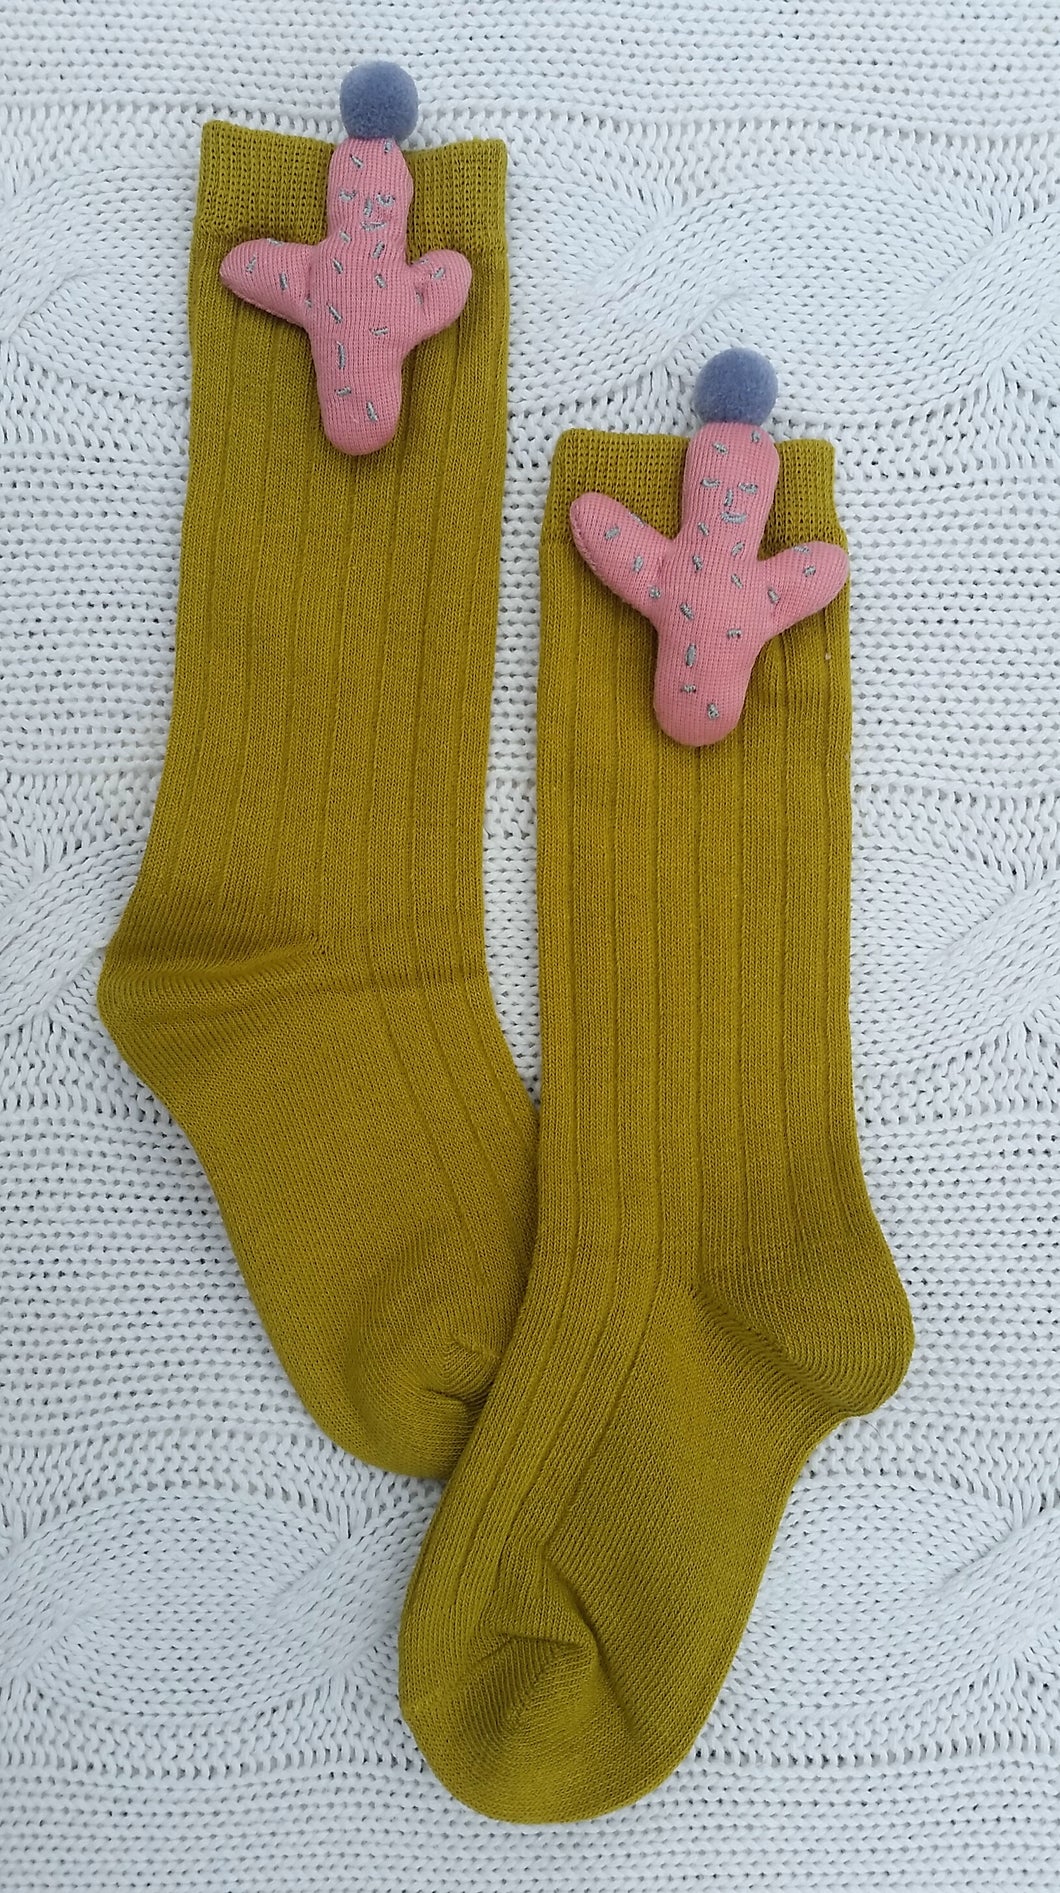 Pedro - knee-high socks with cactus ornament - yellow with pink